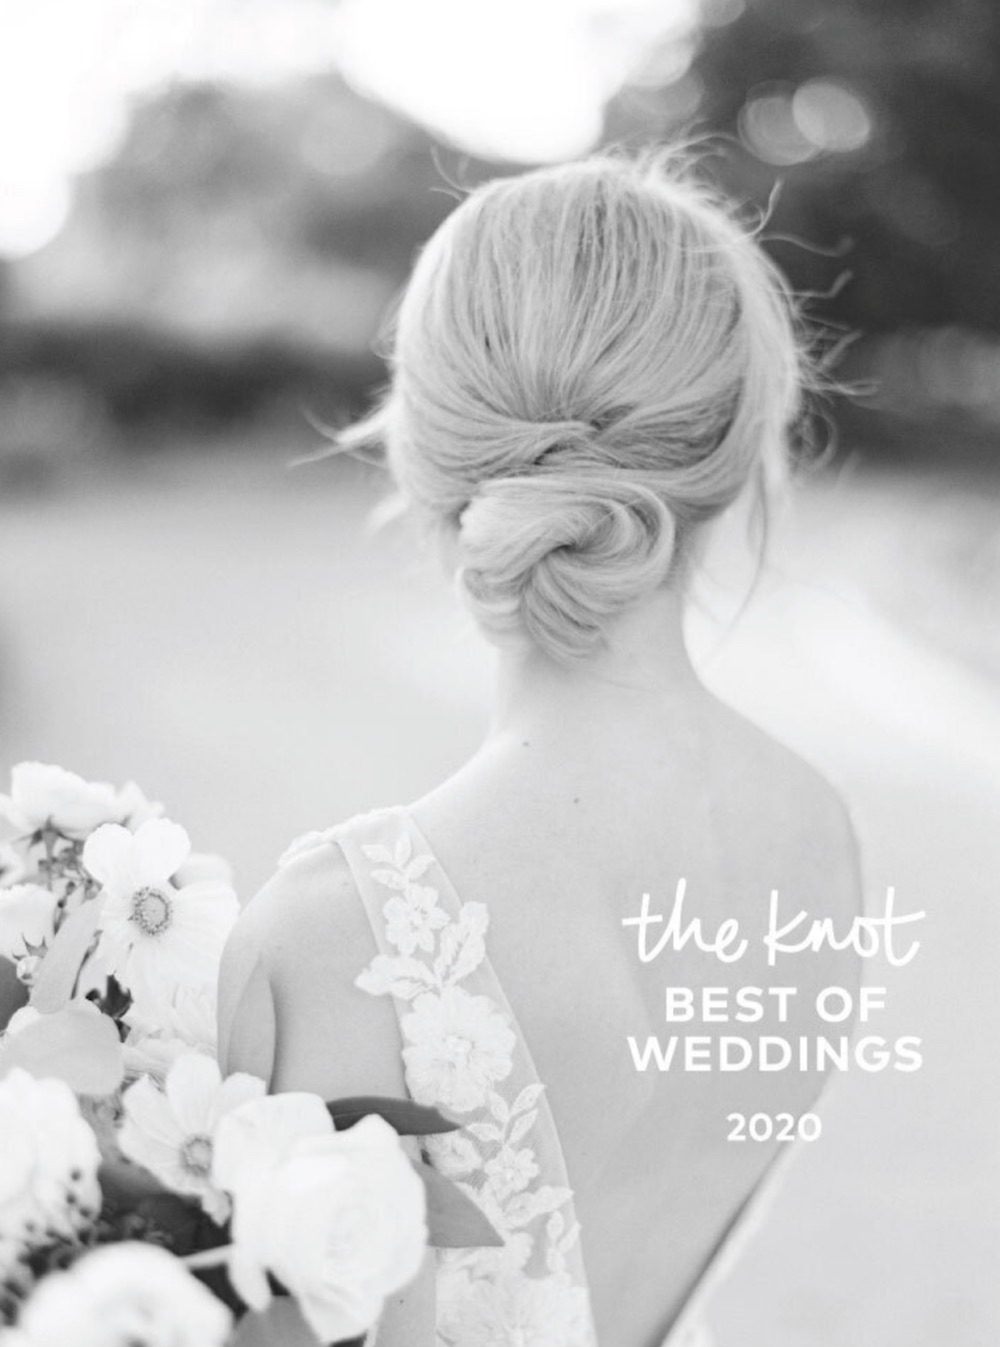 Black and white photo of Mackenzie Reiter with her back to the camera, image overlaid with text that reads ‘The Knot 2020 “Best of Wedding Photographer”’